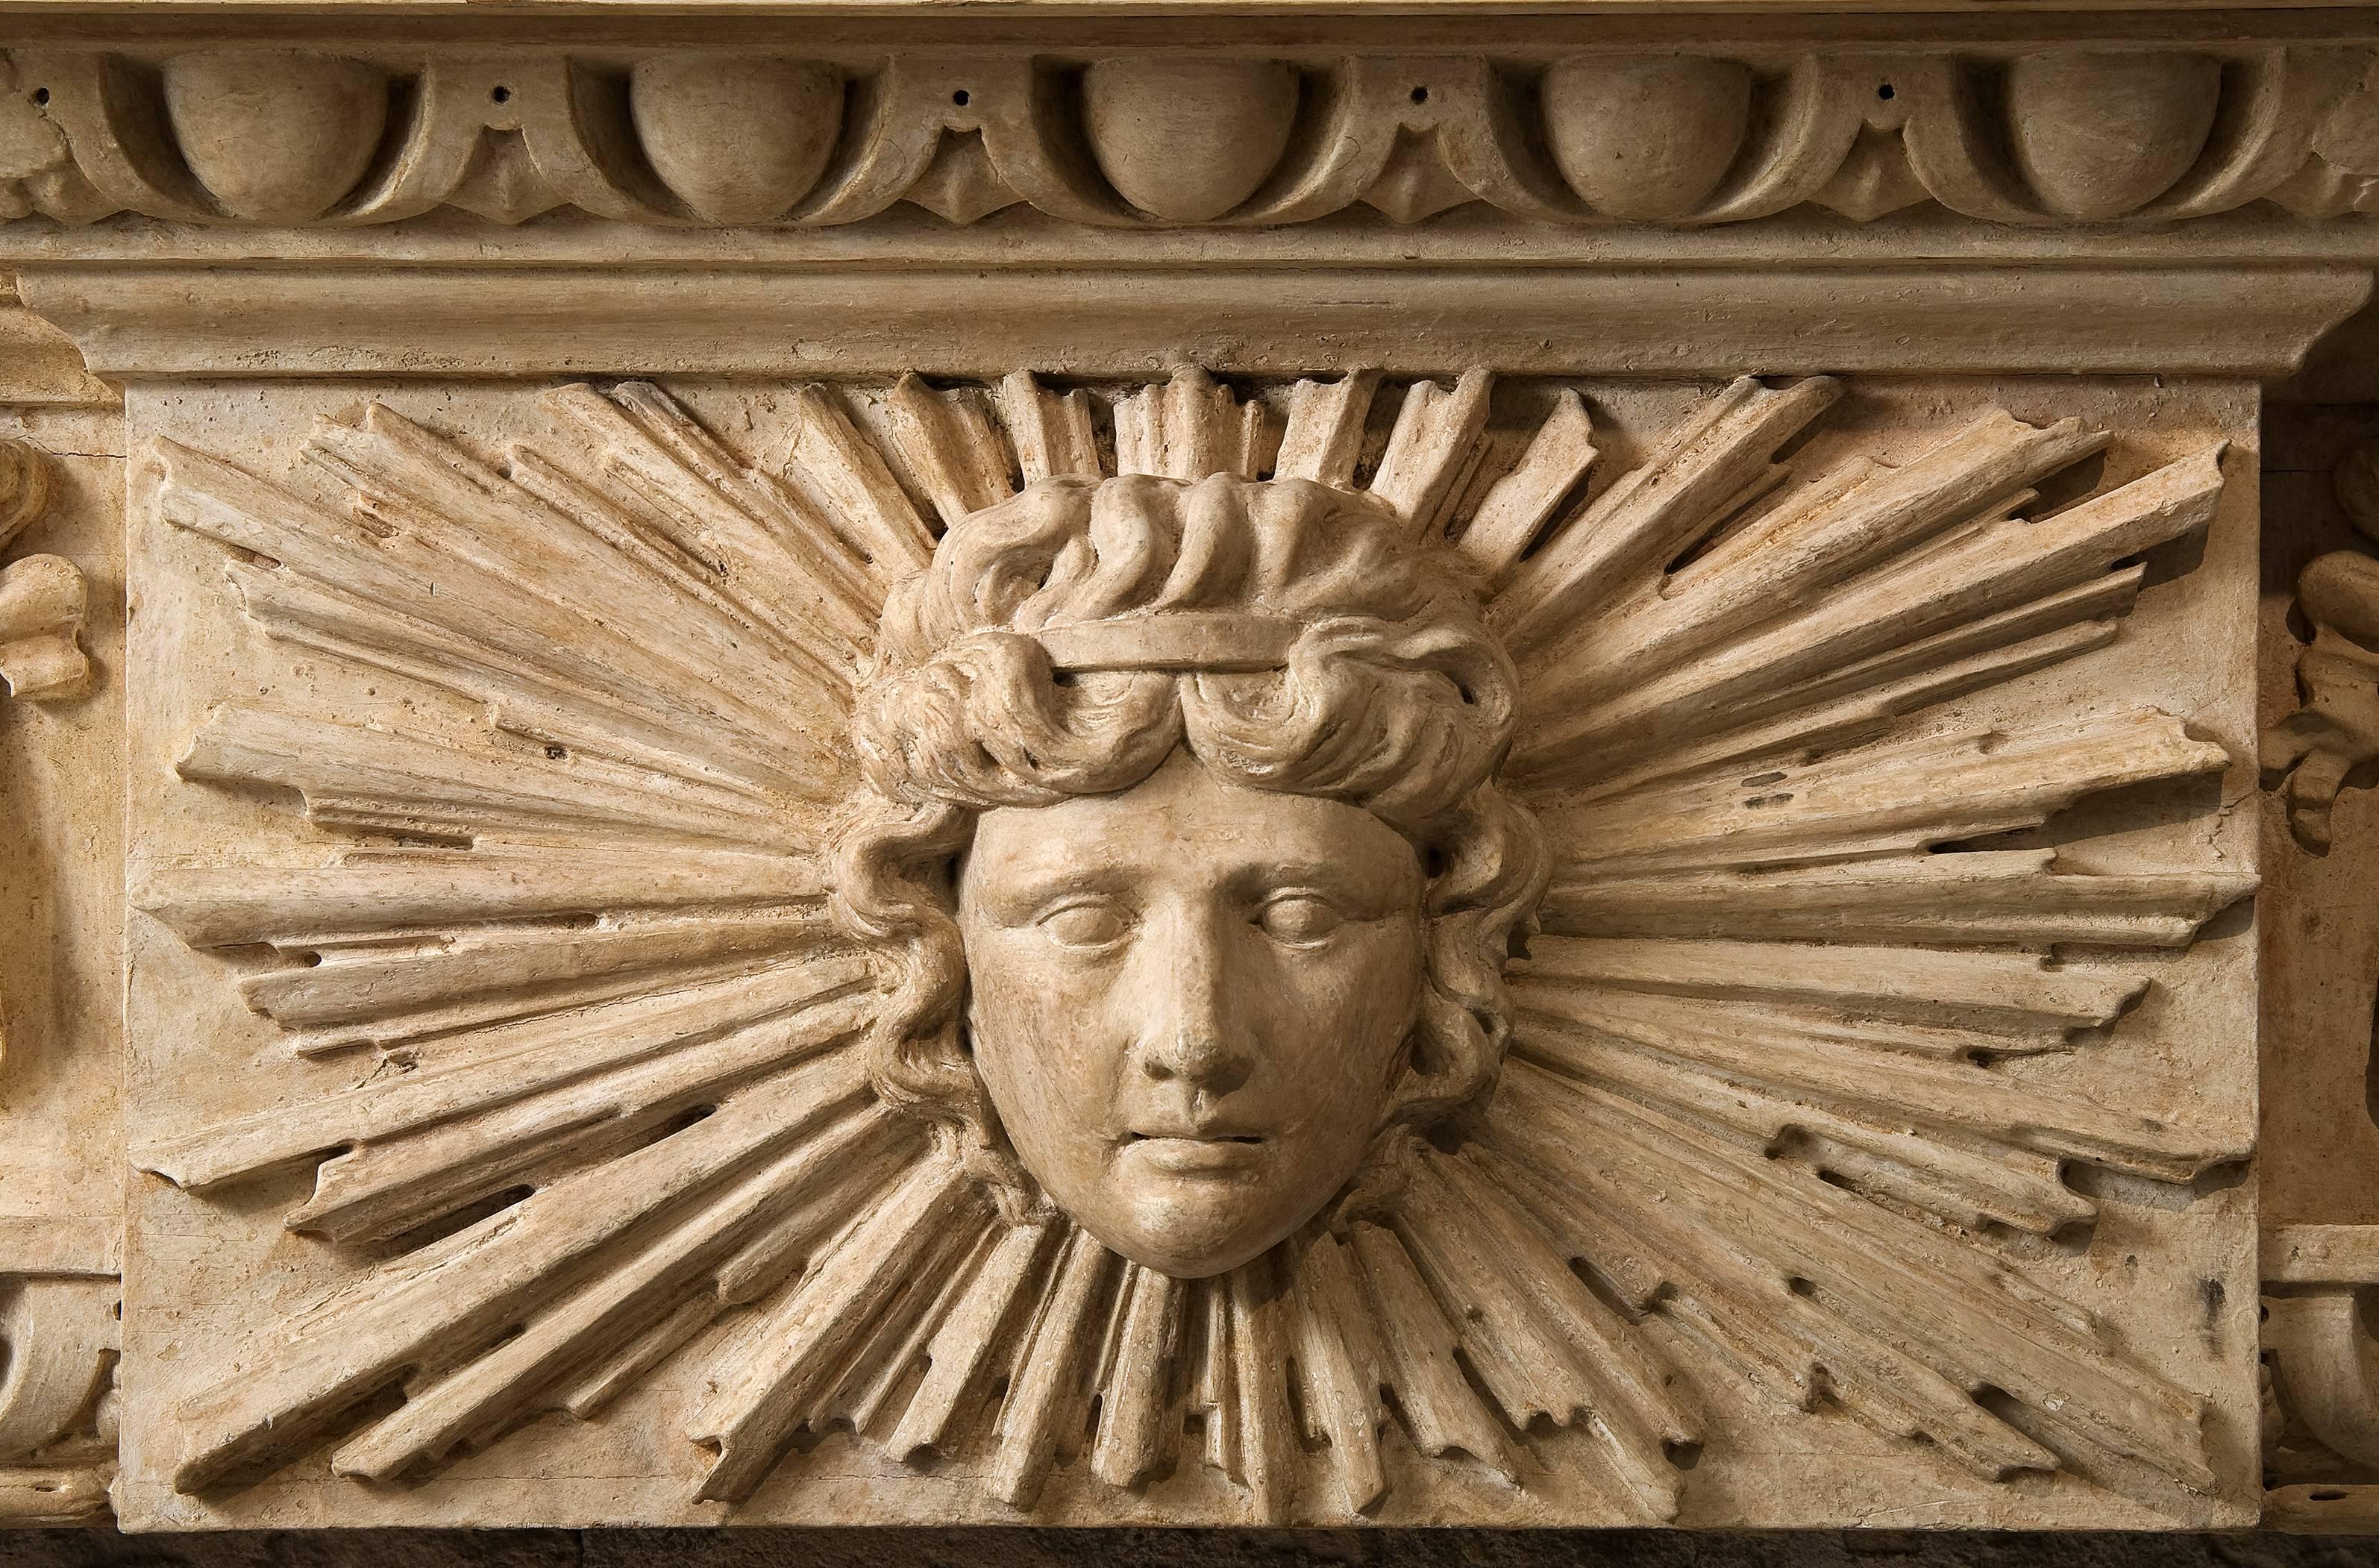 Fireplace in painted wood, 18th century style, circa 1745.
Richly carved by Henry Edmund Goodridge (1791-1894). The wood is carved substantially all-over mantel.
This fireplace is decorated with acanthus leaves and a big sun face on its shelf